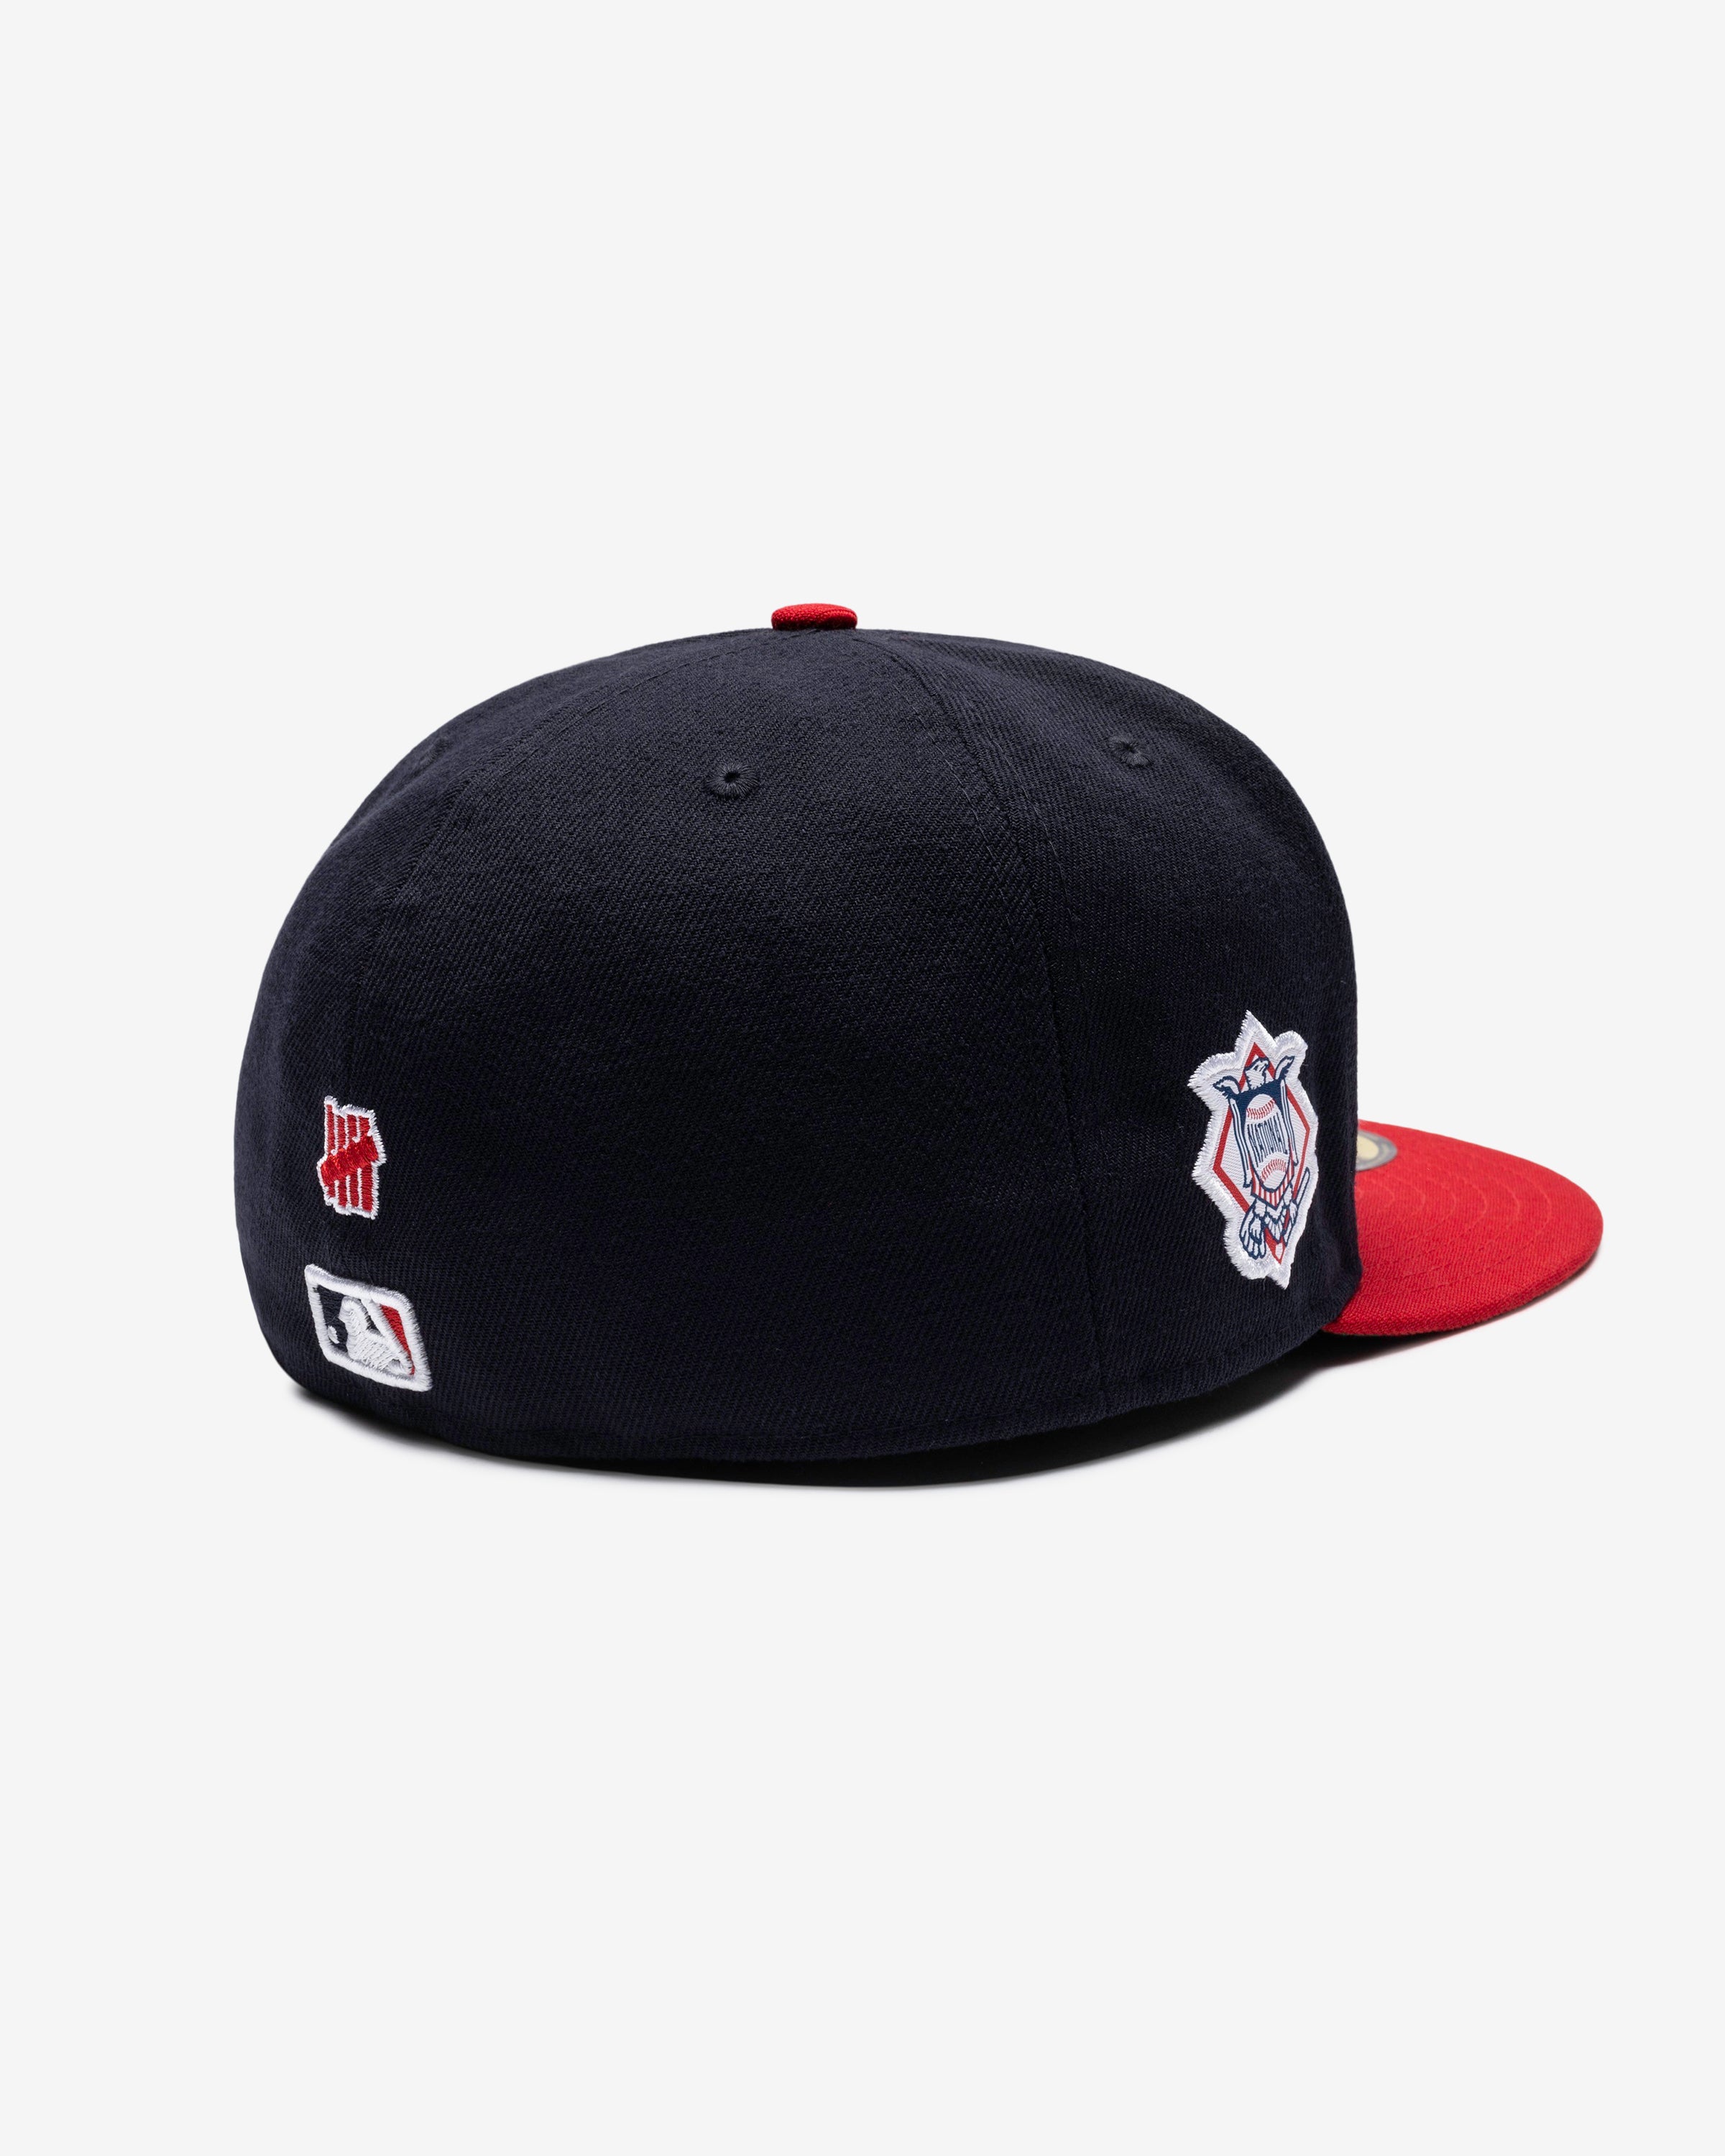 UNDEFEATED X NE X MLB FITTED - ATLANTA BRAVES